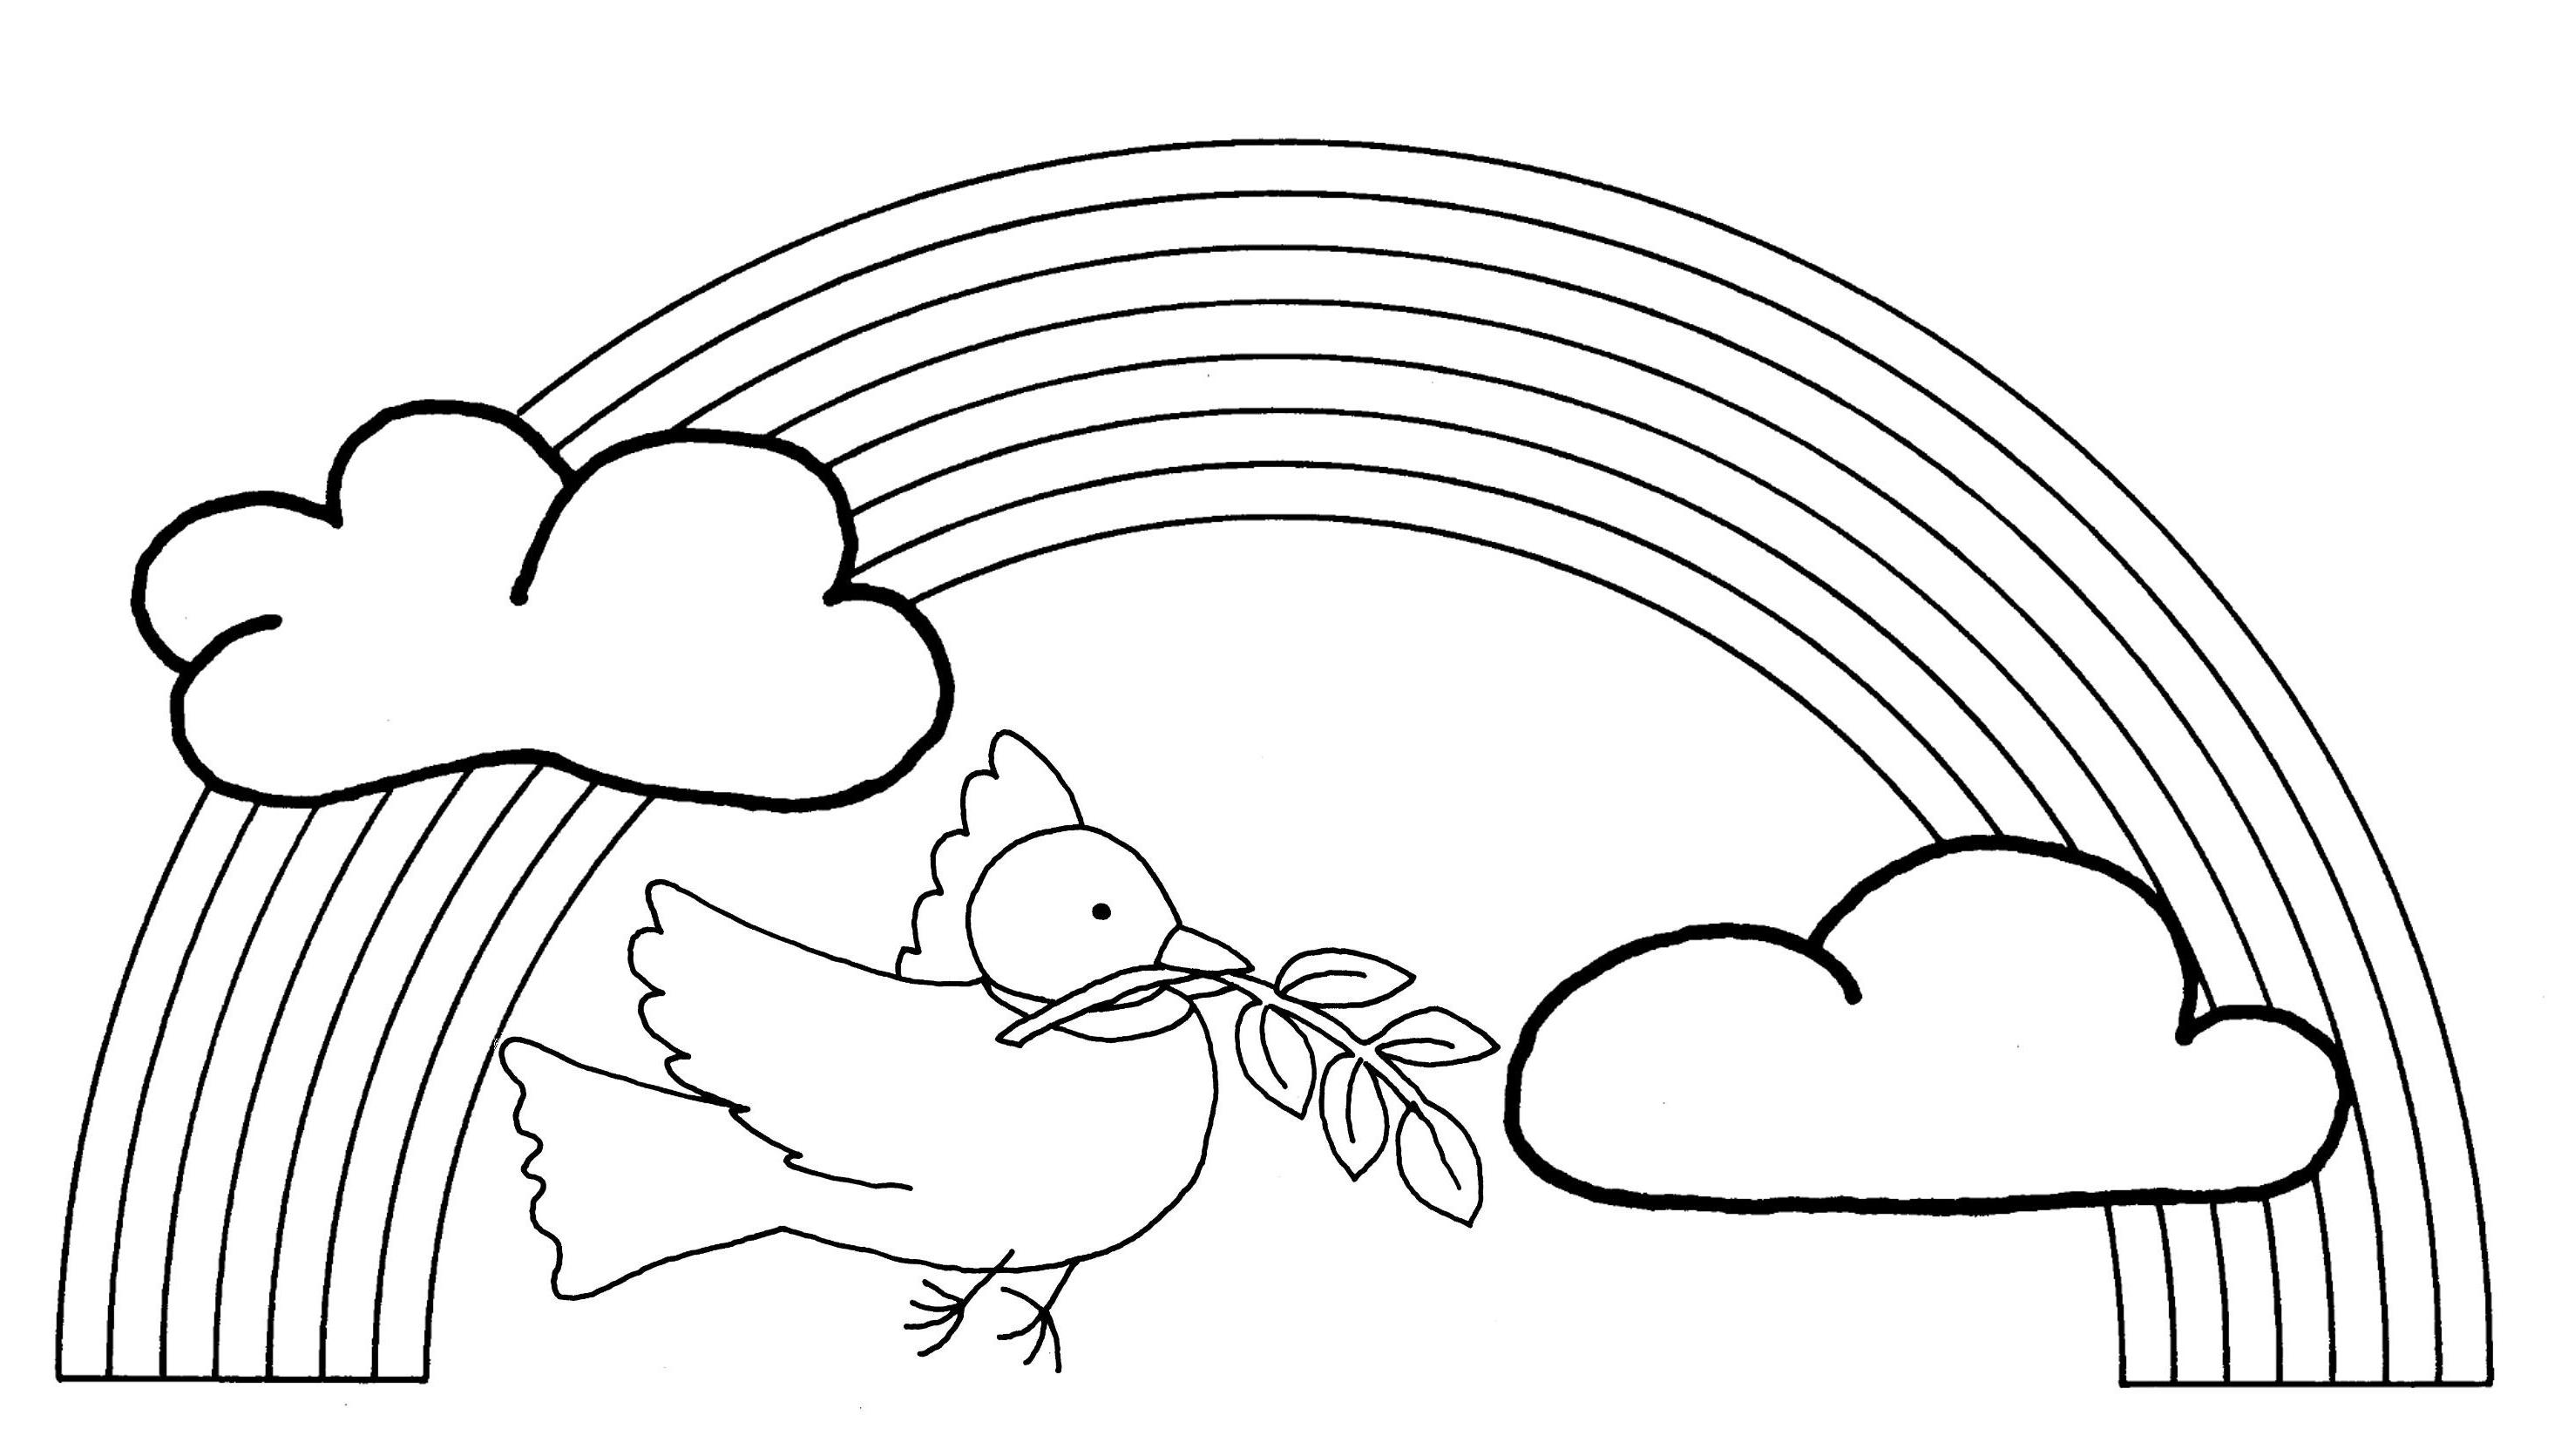 Rainbow (Nature) - Page 2 - Printable coloring pages